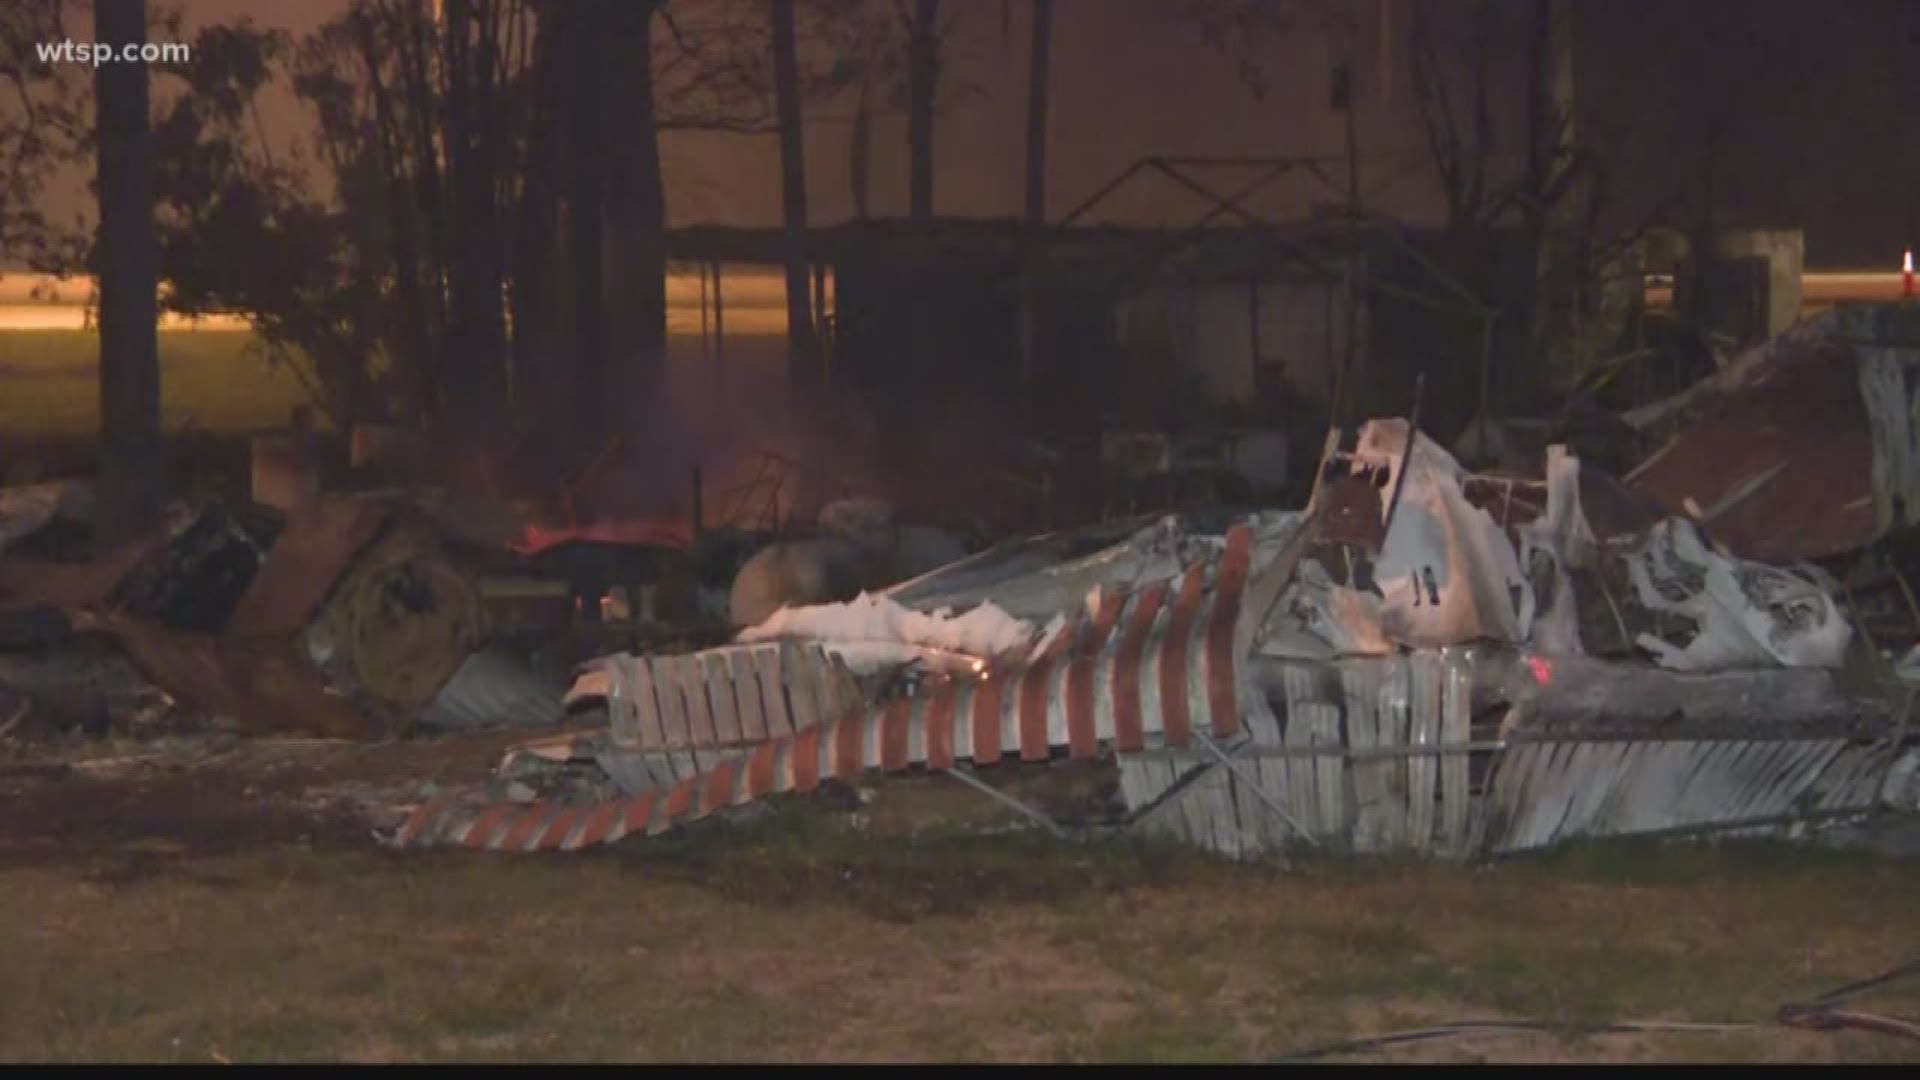 Ten homes were destroyed at a mobile home park across the street when the propane tanks exploded. Dark smoke was billowing into the air from the scene near Twitty Road and U.S. Highway 27.